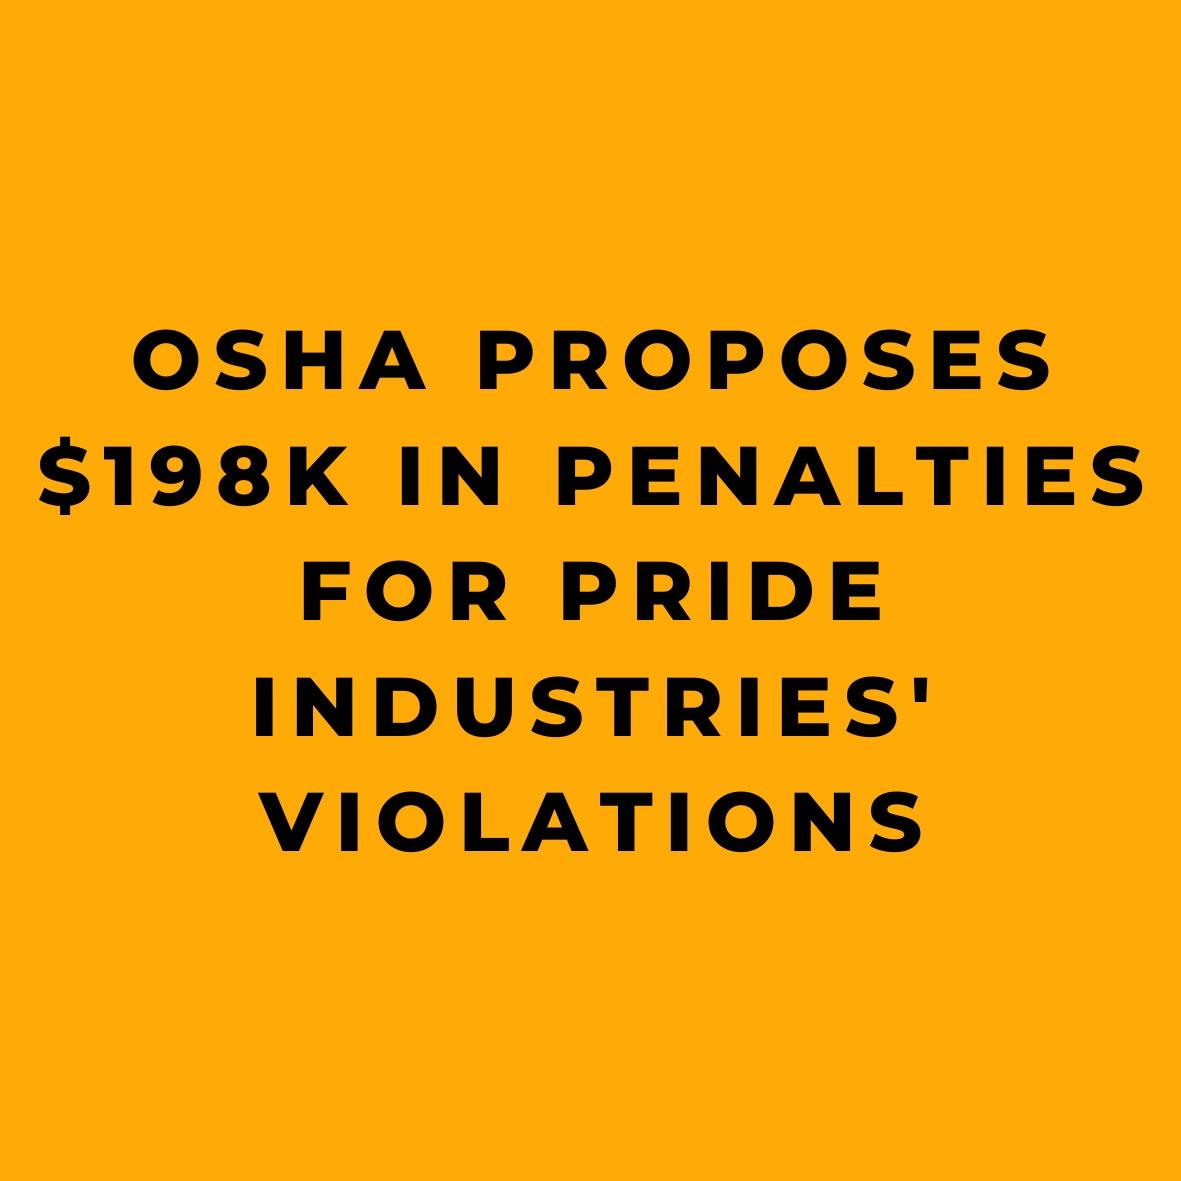 OSHA Proposes $198K in Penalties for PRIDE Industries' Violations